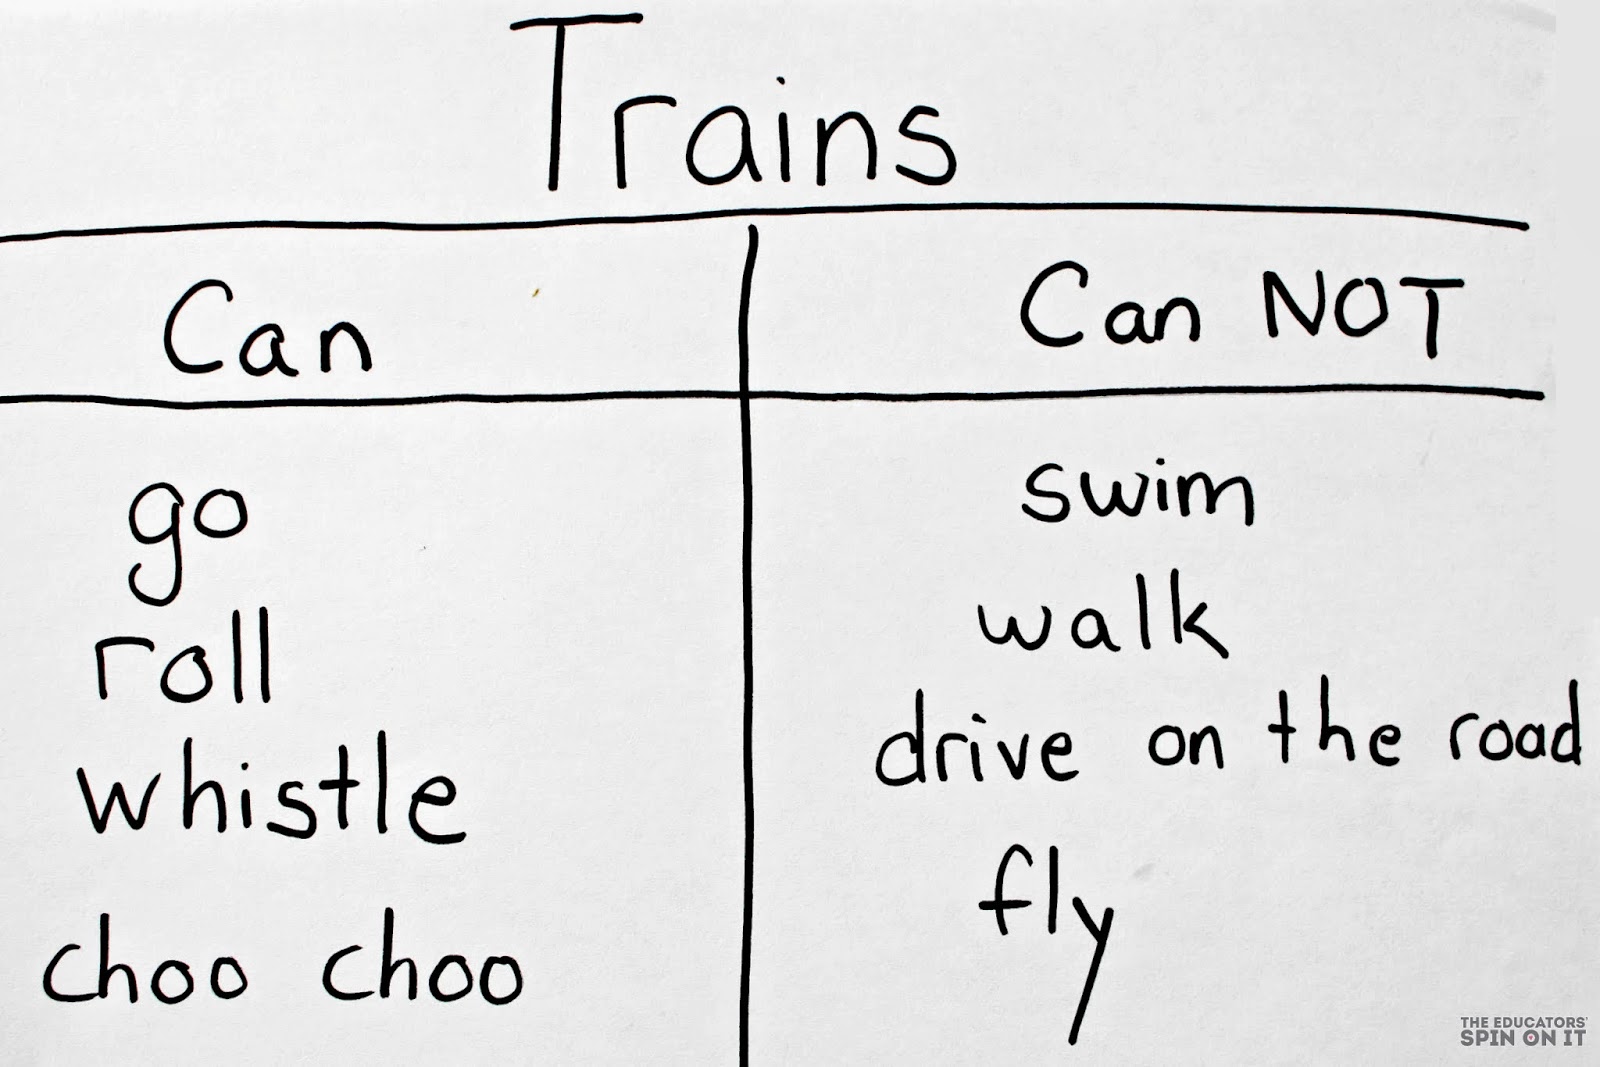 List of what trains can and cannot do